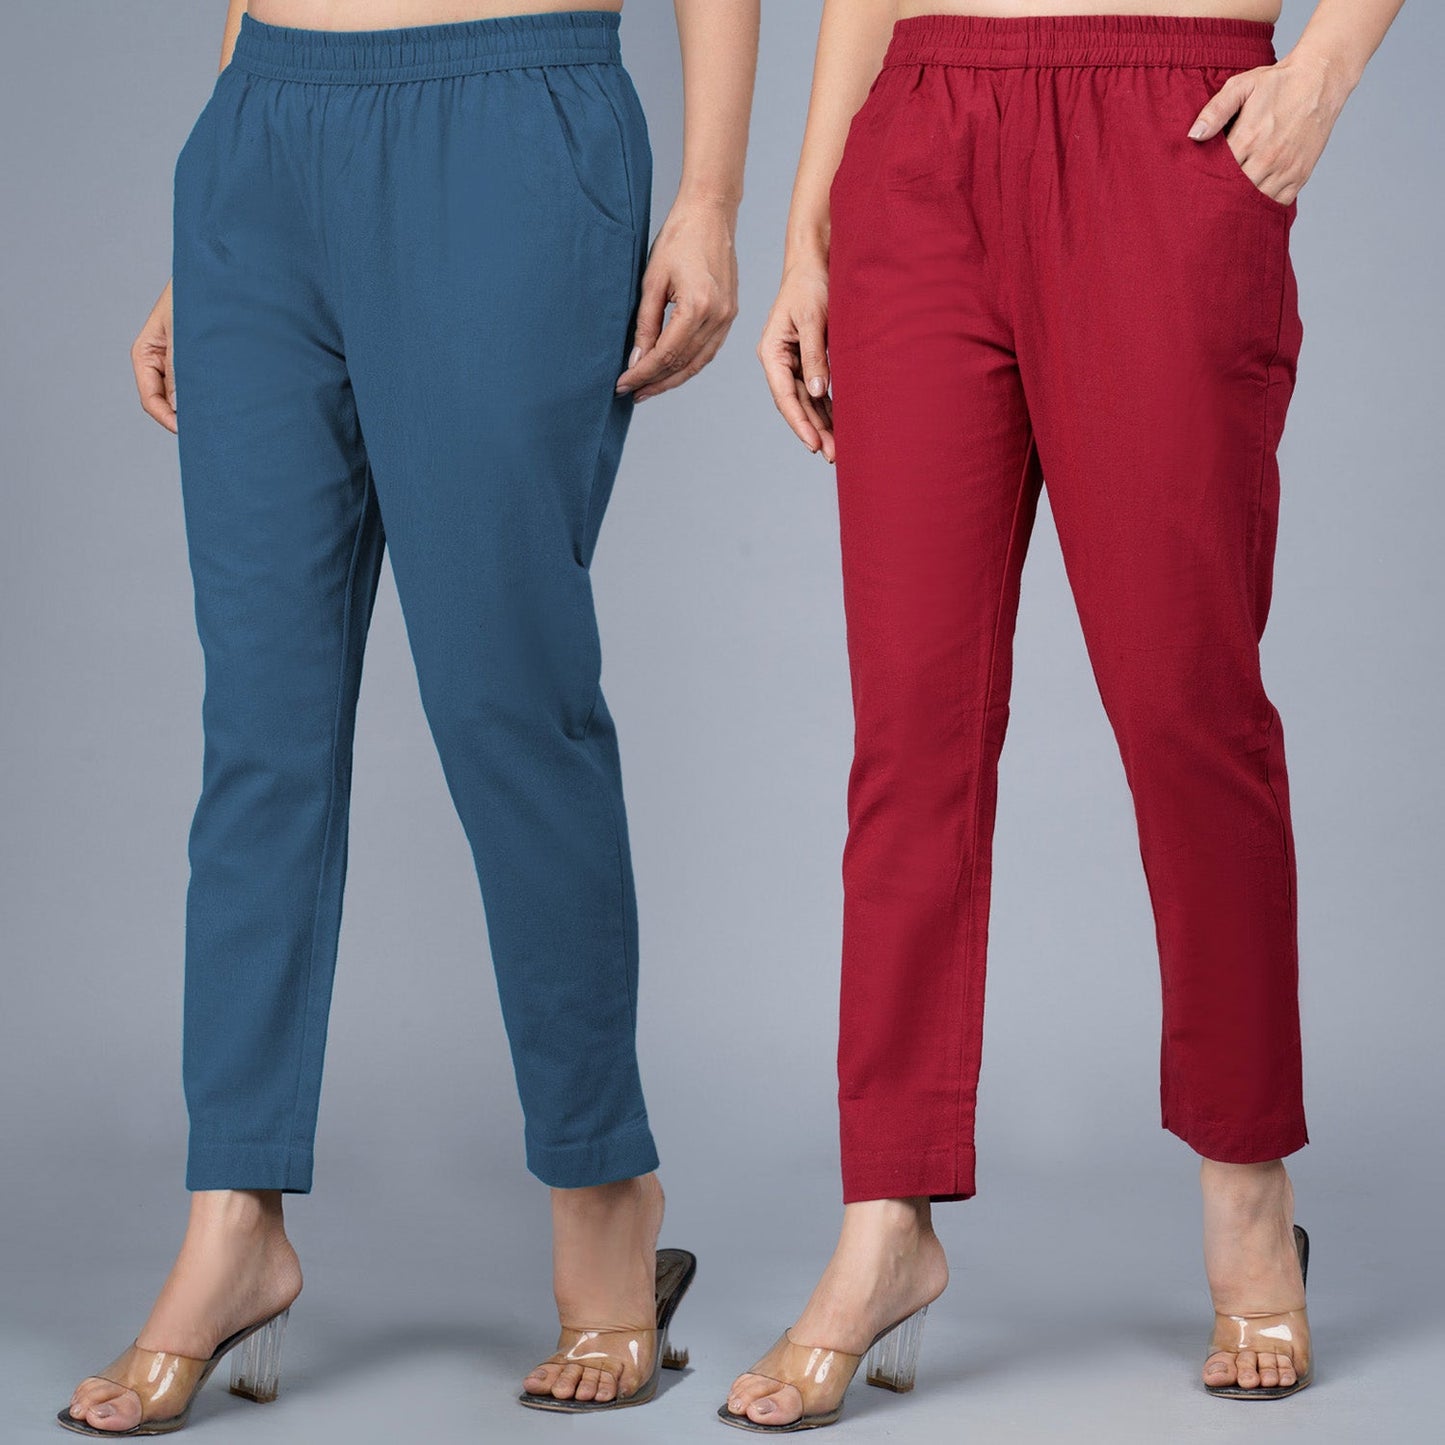 Pack Of 2 Womens Regular Fit Teal Blue And Maroon Fully Elastic Waistband Cotton Trouser